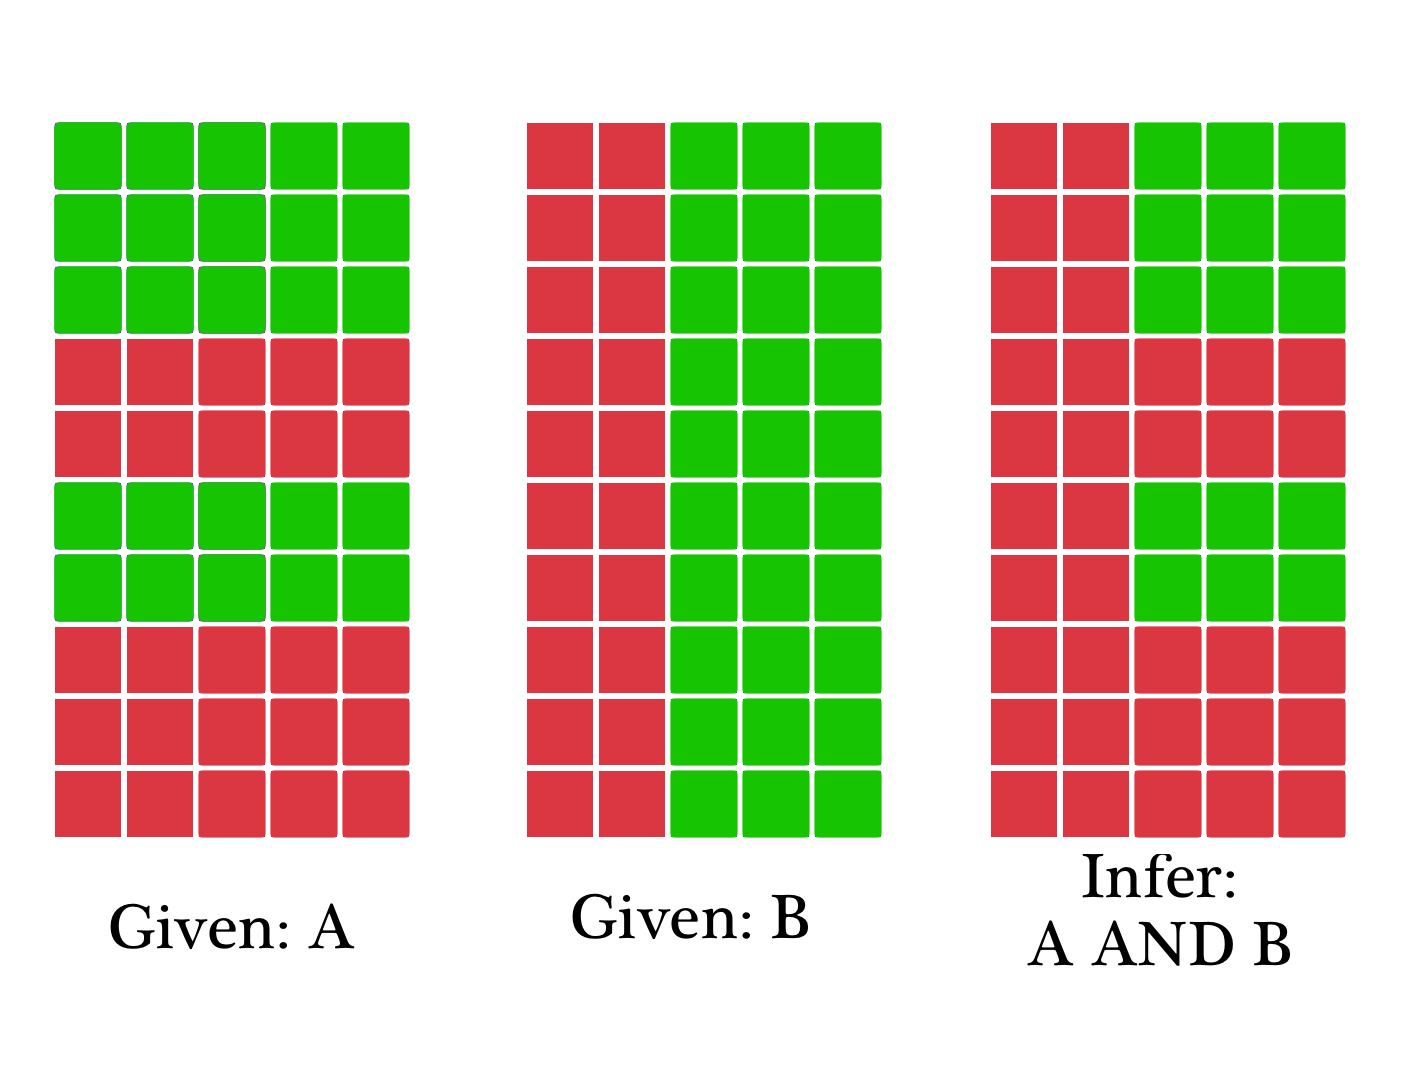 Once you've inferred where voters agree with A AND B, you still need to draw your districts.